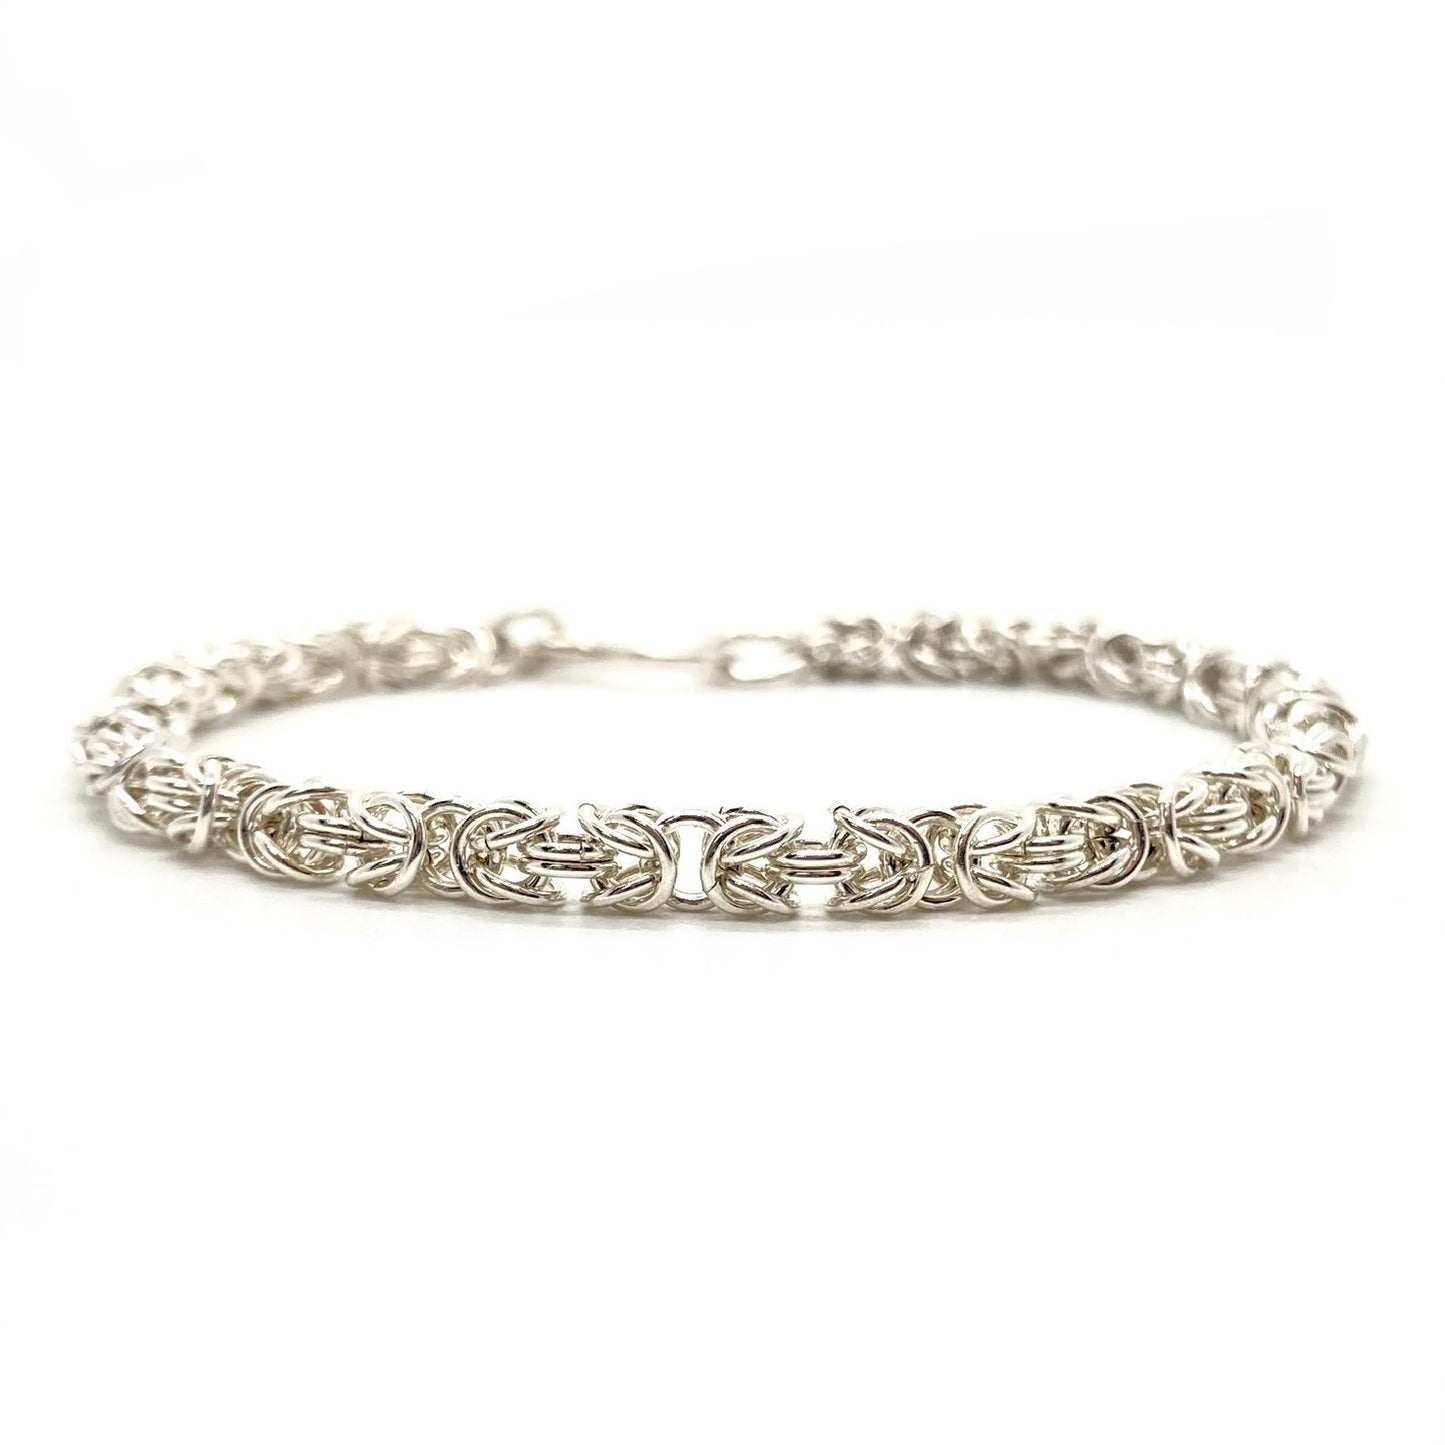 Delicate Byzantine Chainmaille Bracelet in Silver at Heal